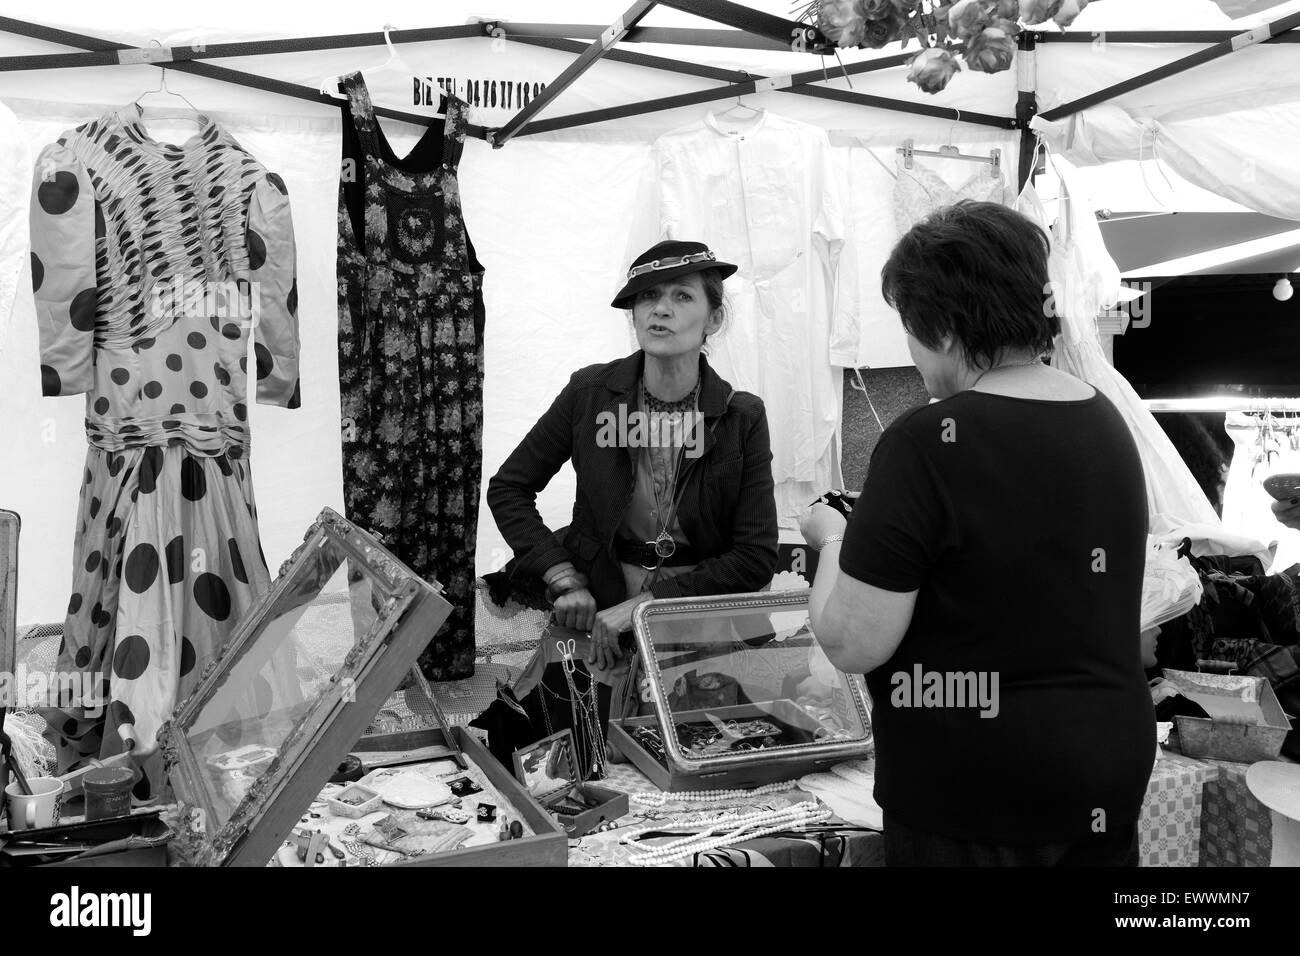 French market stall holder selling ladies fashion wear at Annecy market in France french Stock Photo